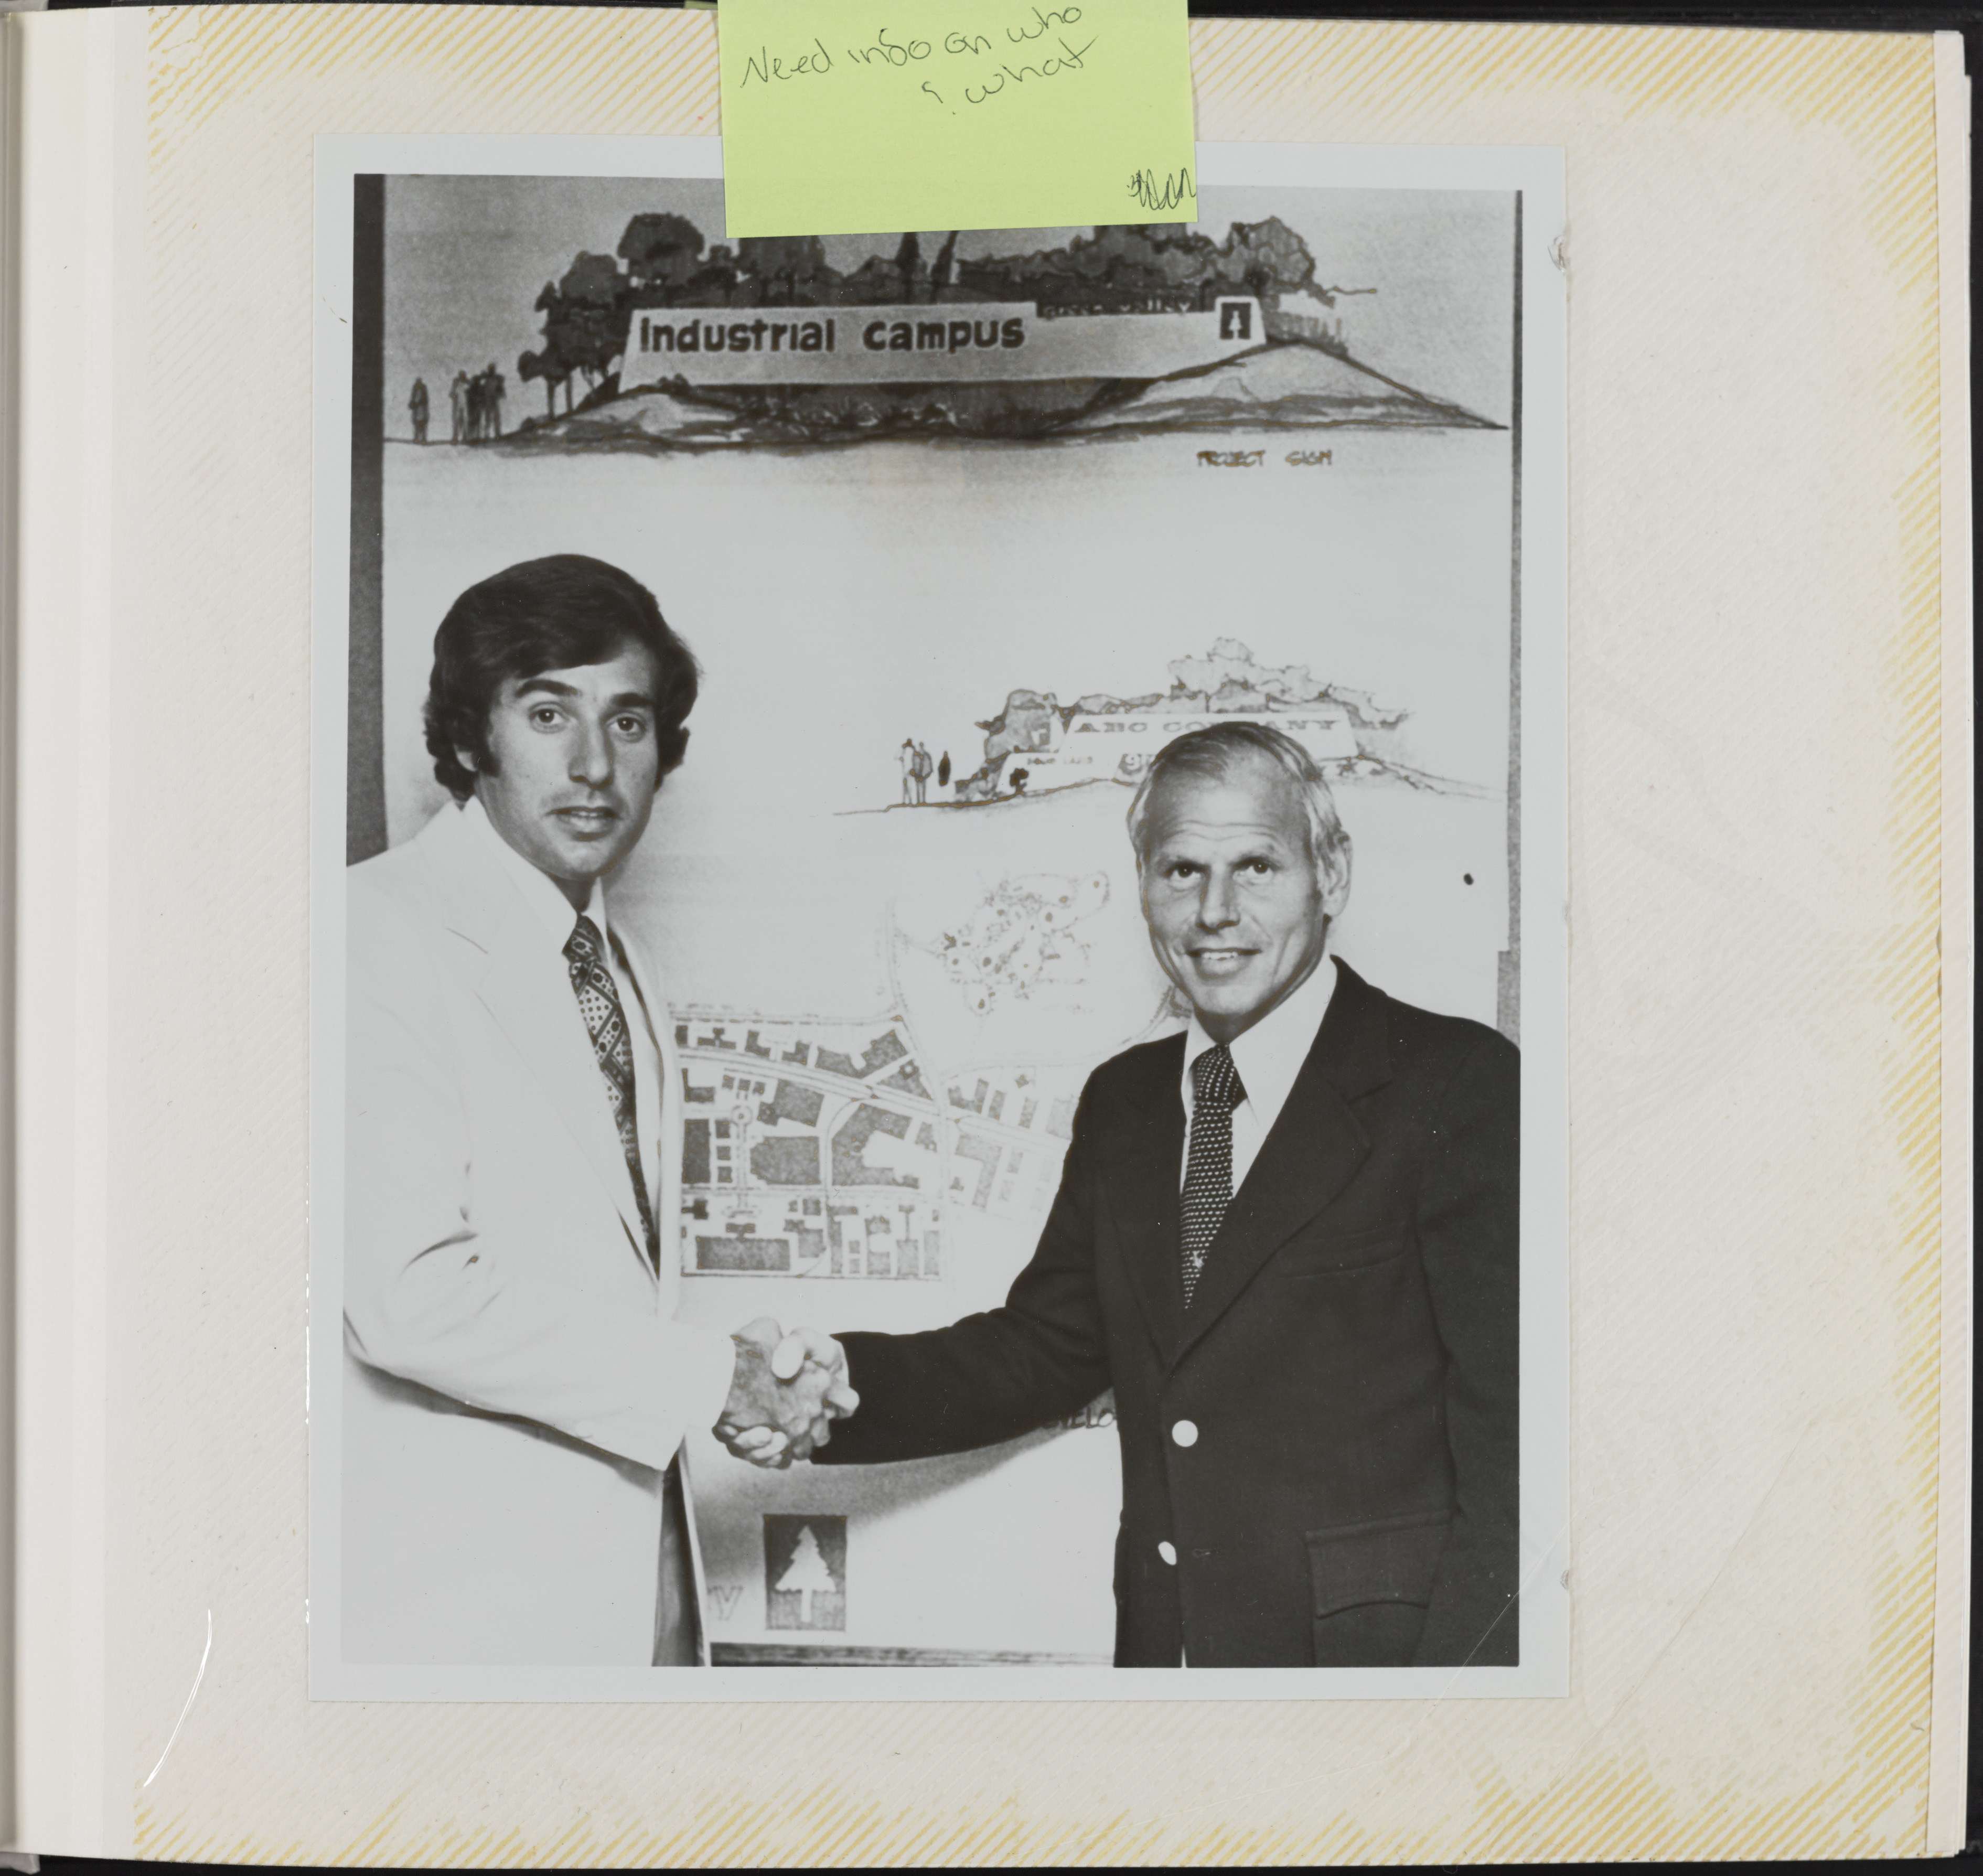 Photograph of Mark Fine shaking hands with unidentified man